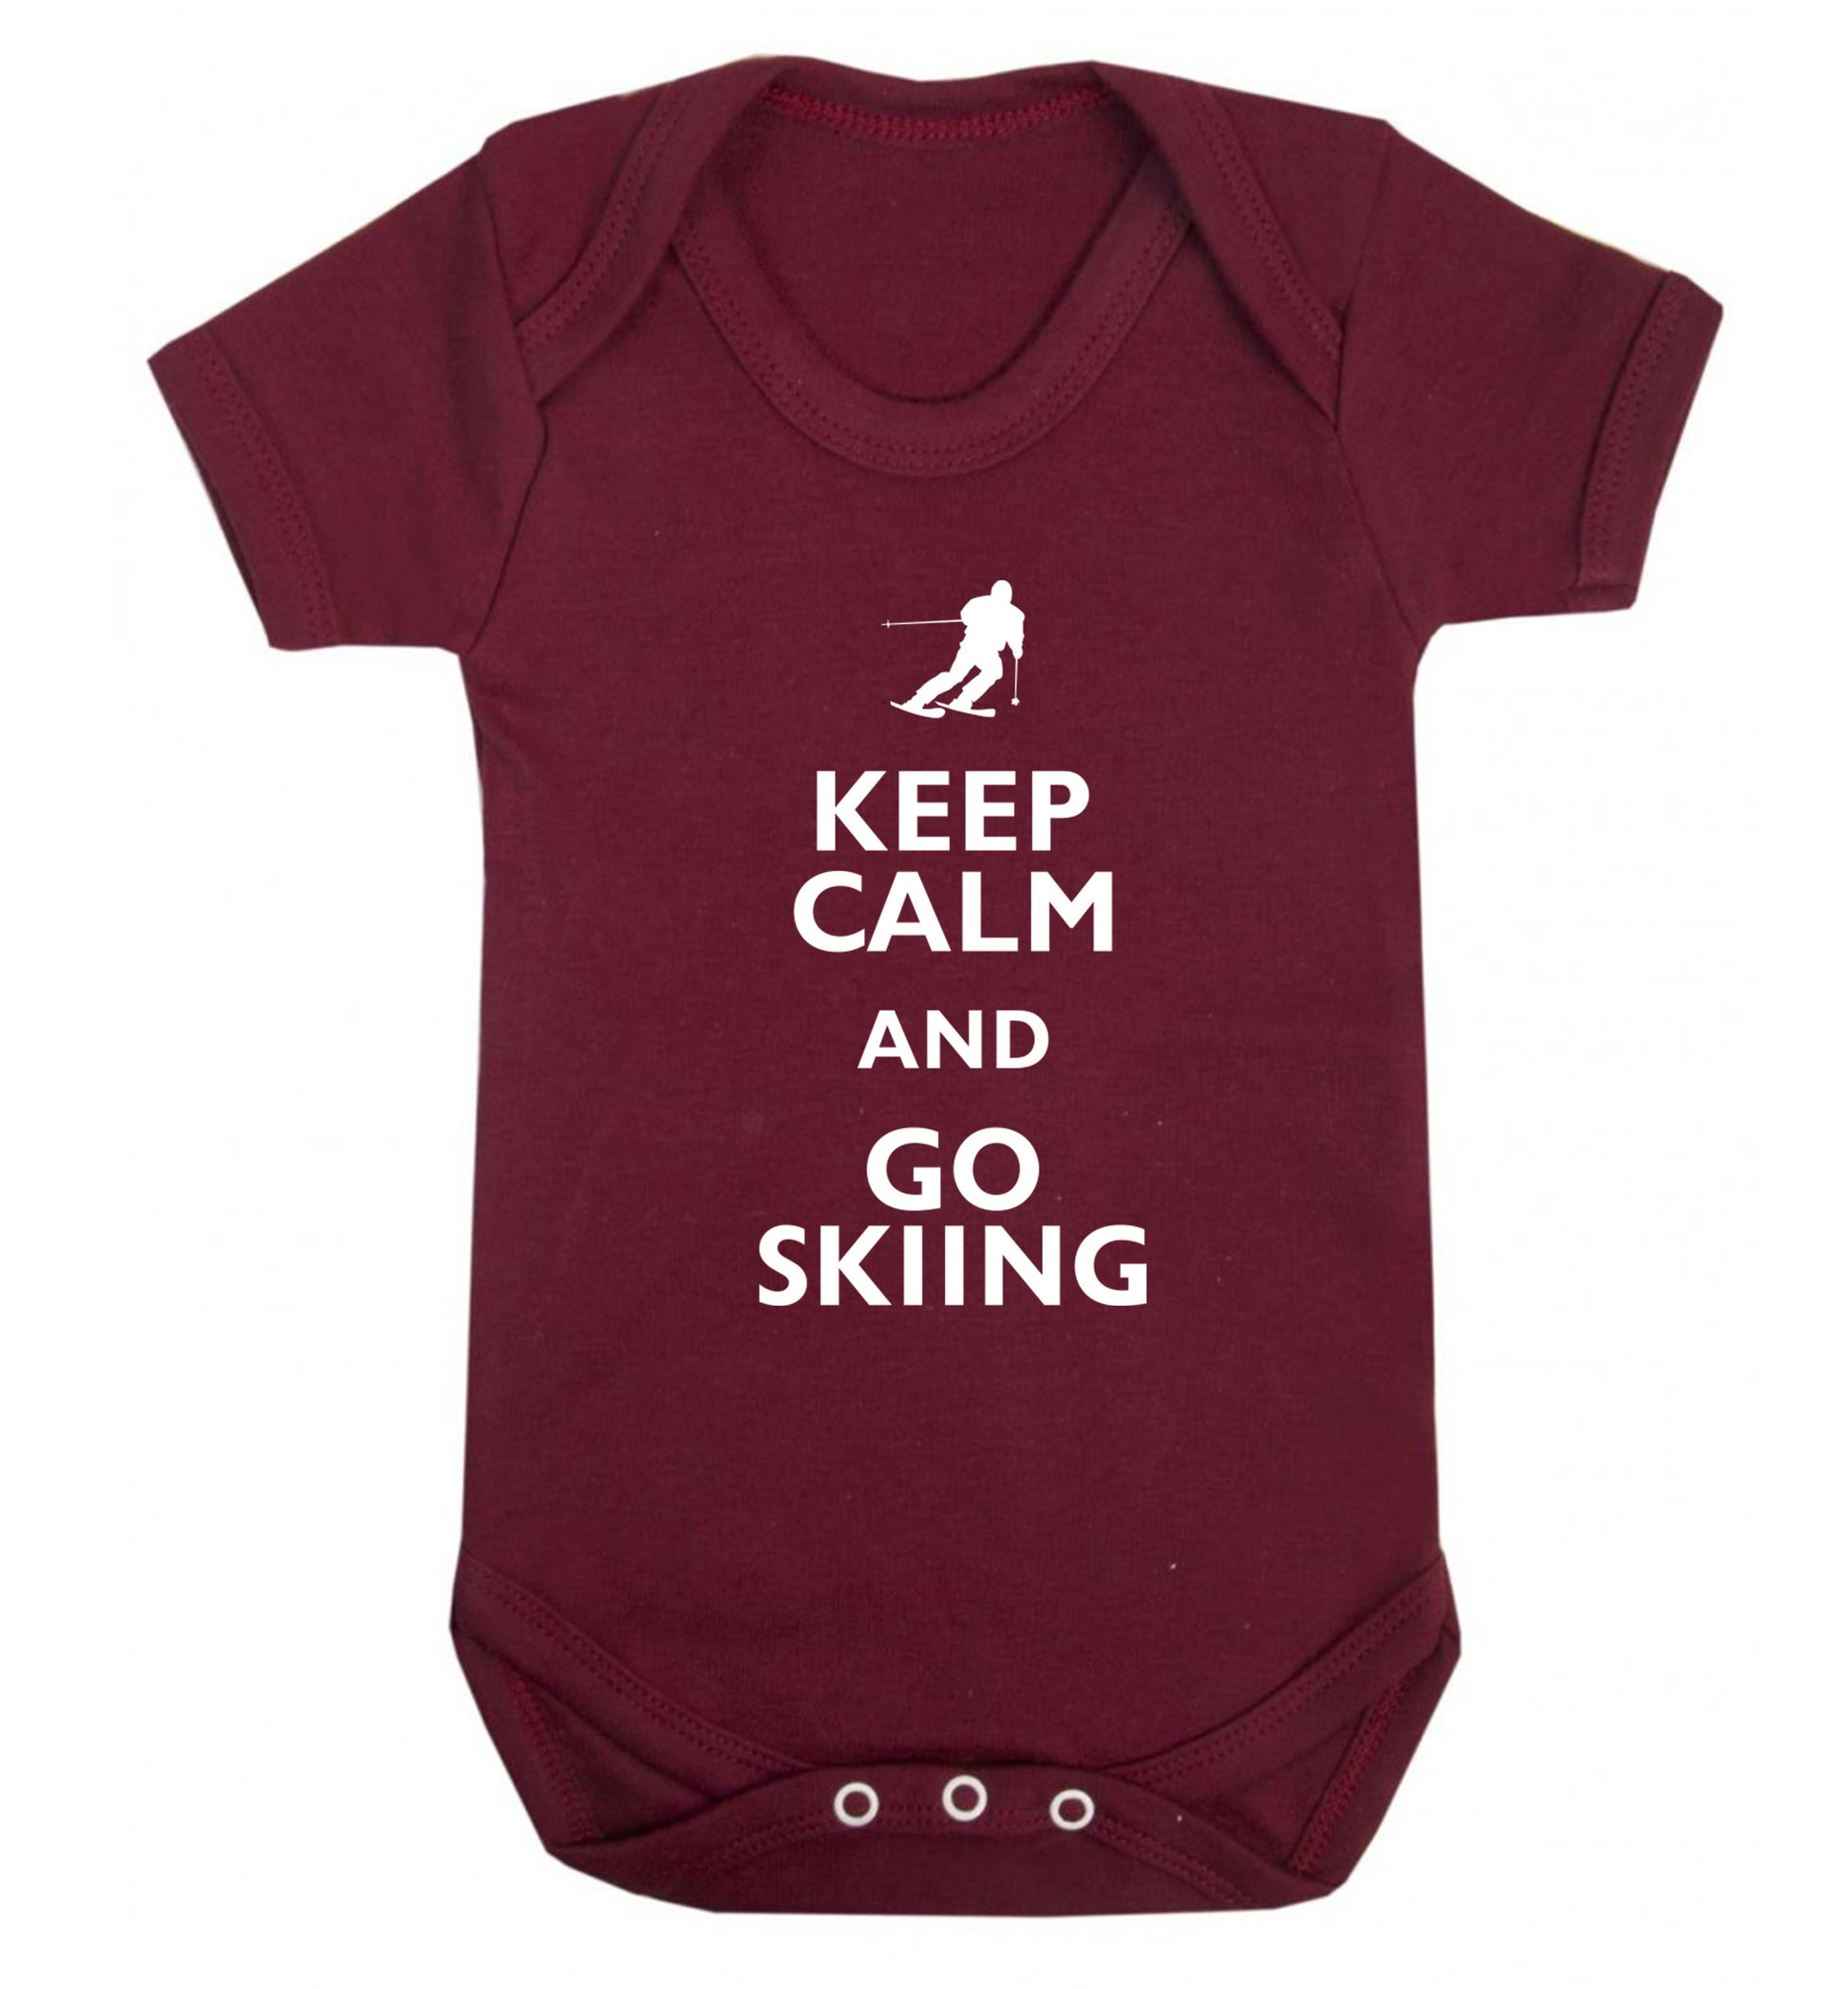 Keep calm and go skiing Baby Vest maroon 18-24 months